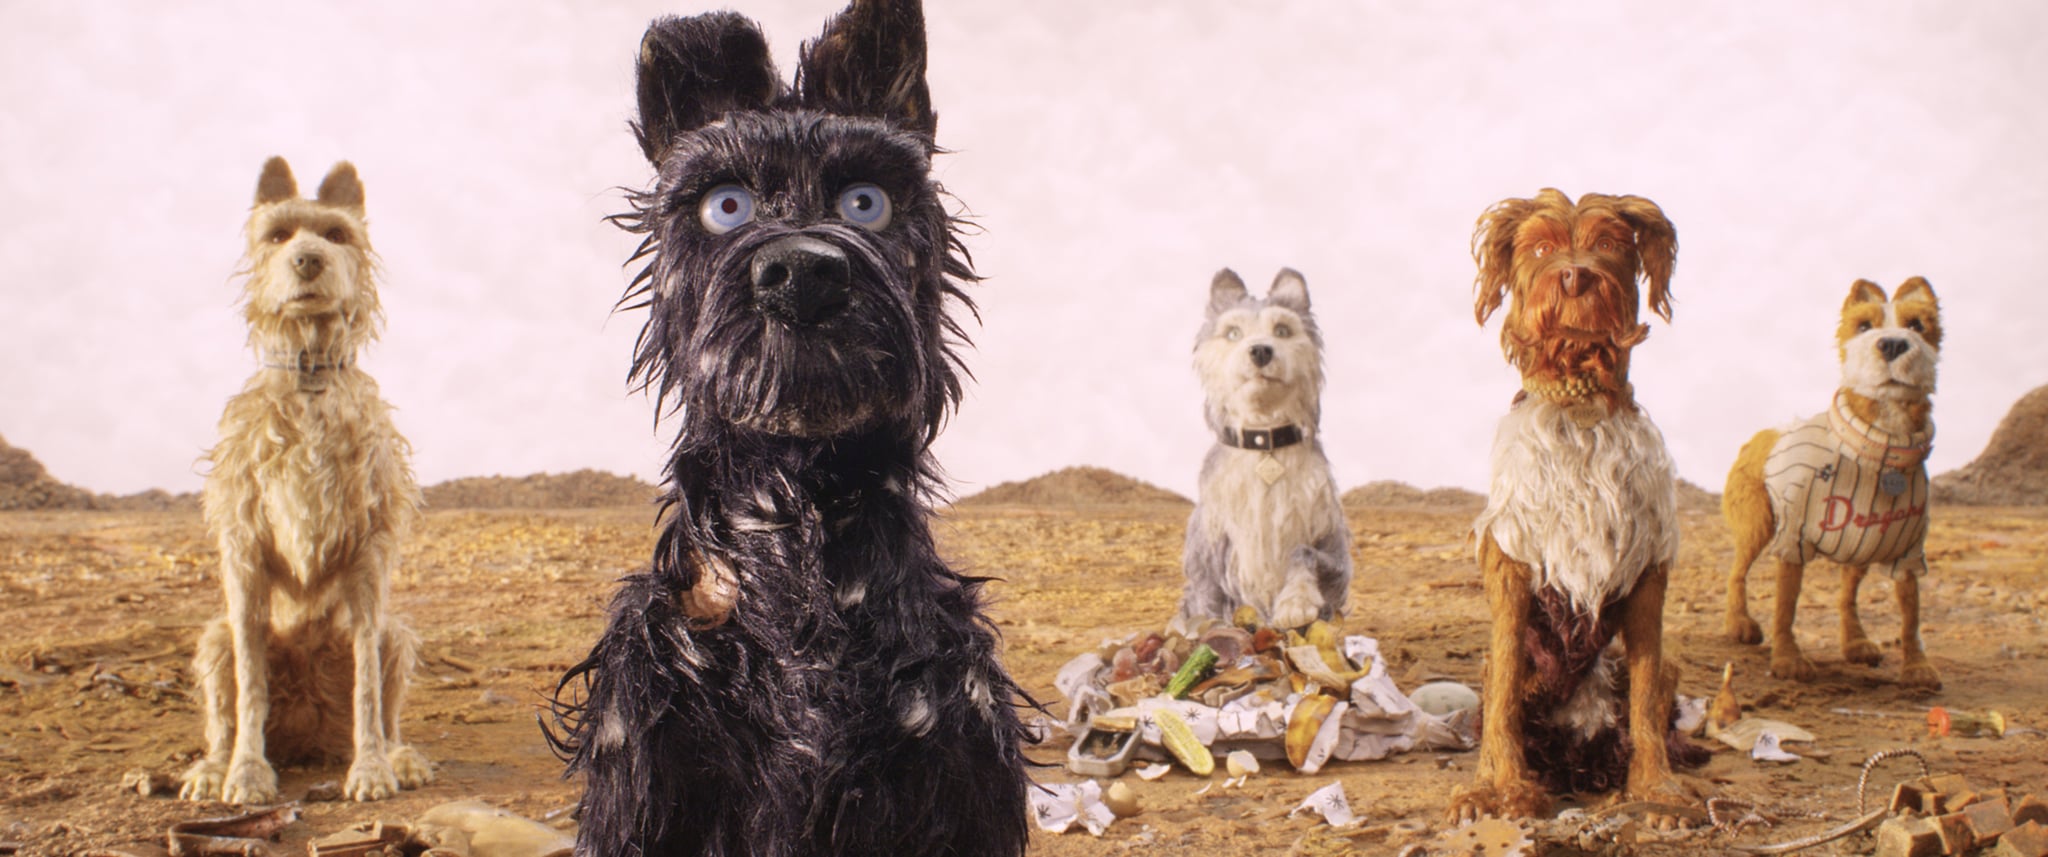 ISLE OF DOGS, from left: Rex (voice: Edward Norton), Chief (voice: Bryan Cranston), Duke (voice: Jeff Goldblum), King (voice: Bob Balaban), Boss (voice: Bill Murray), 2018.  TM & copyright Fox Searchlight Pictures. All rights reserved. /Courtesy Everett Collection